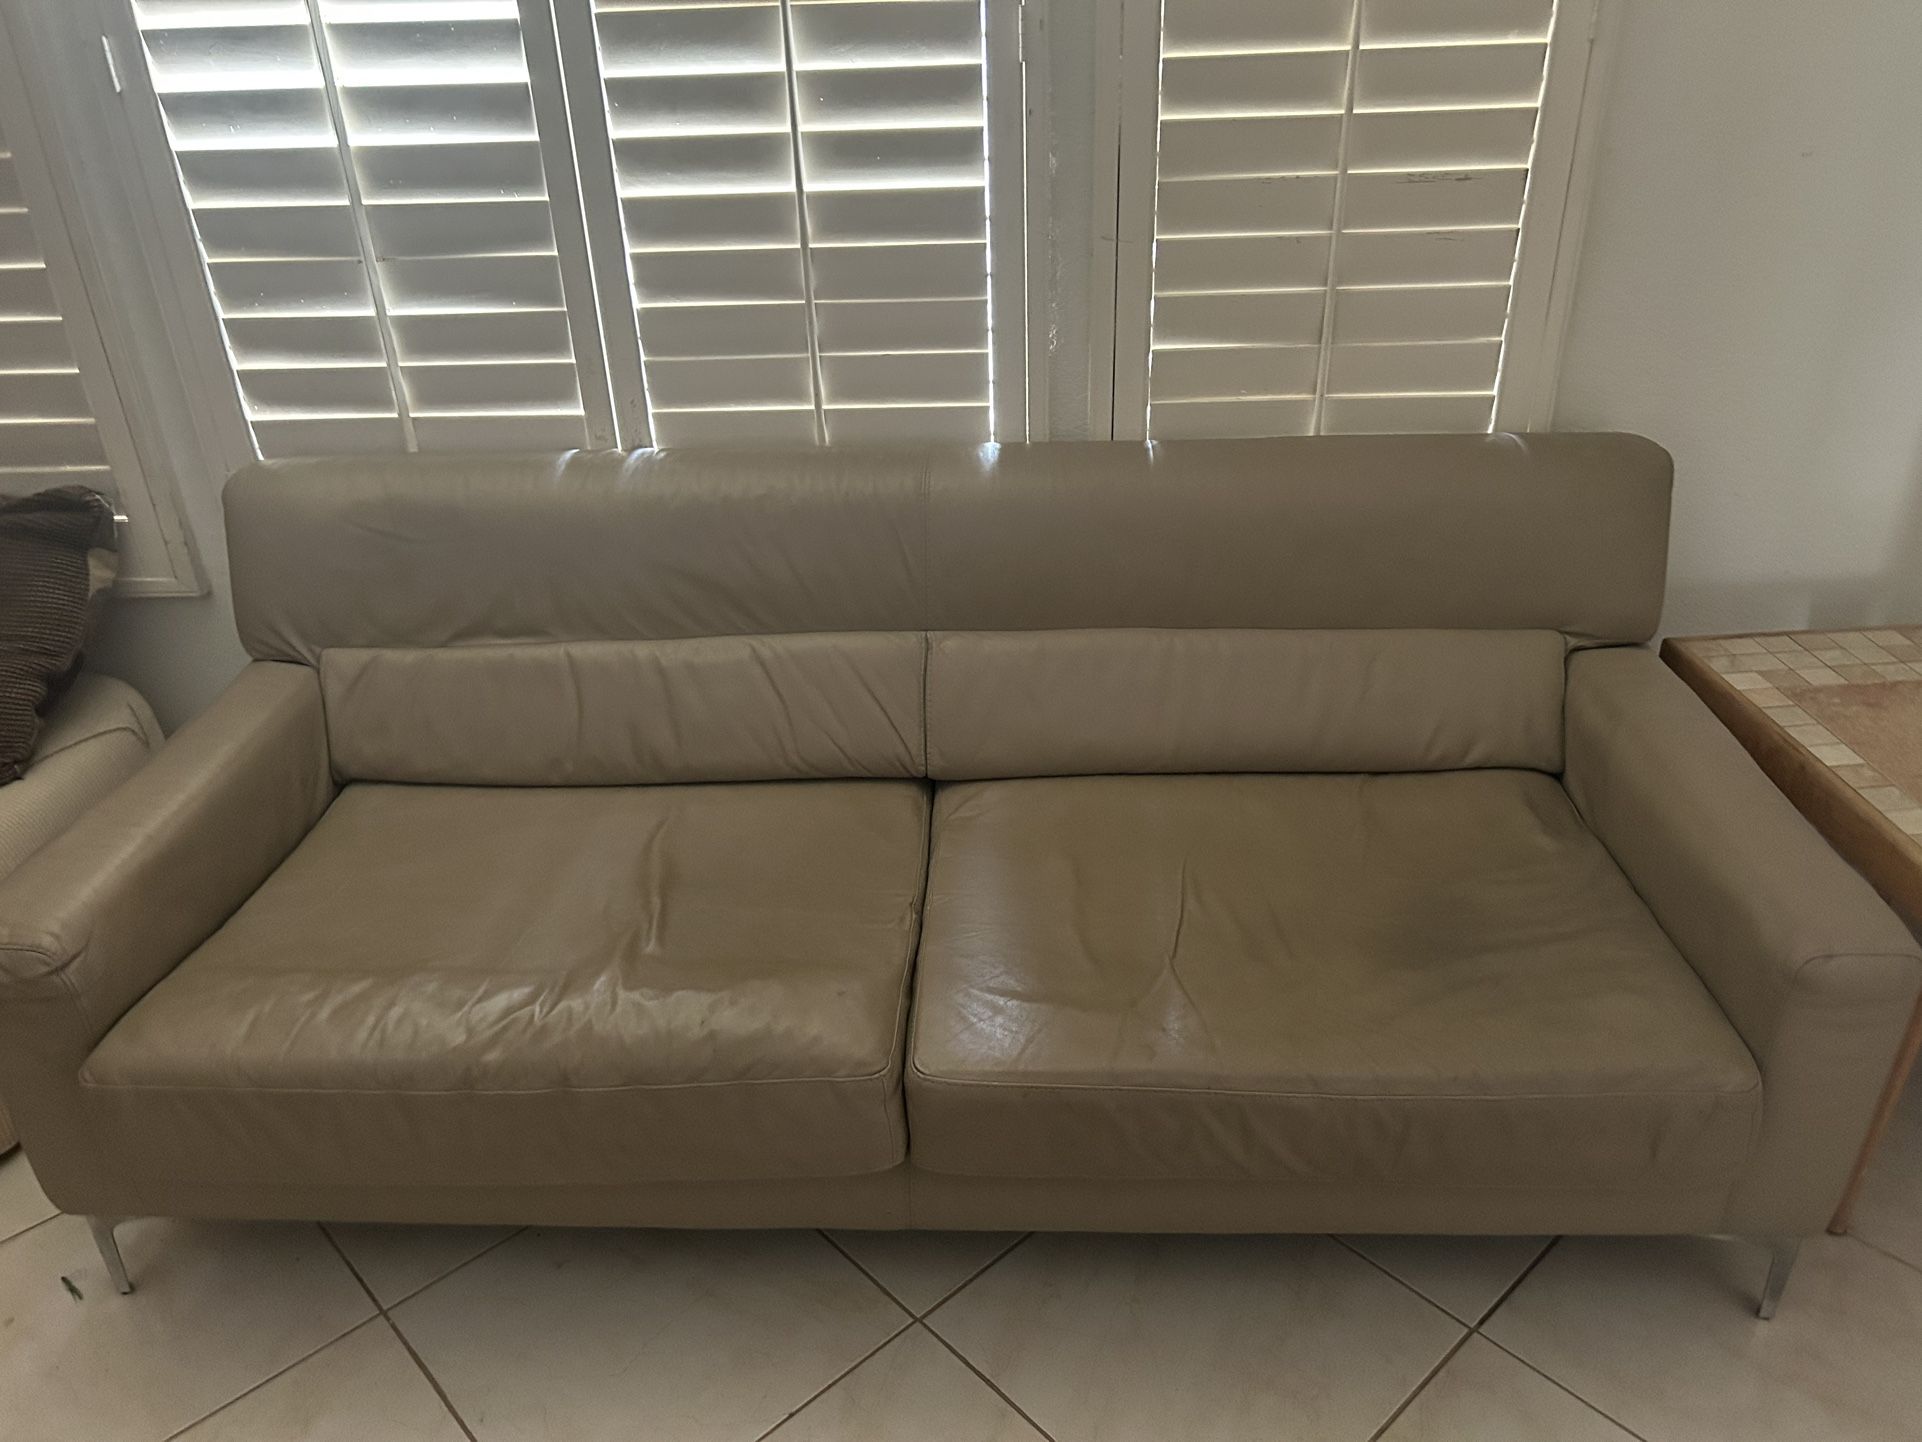  $7000 Italian leather couch